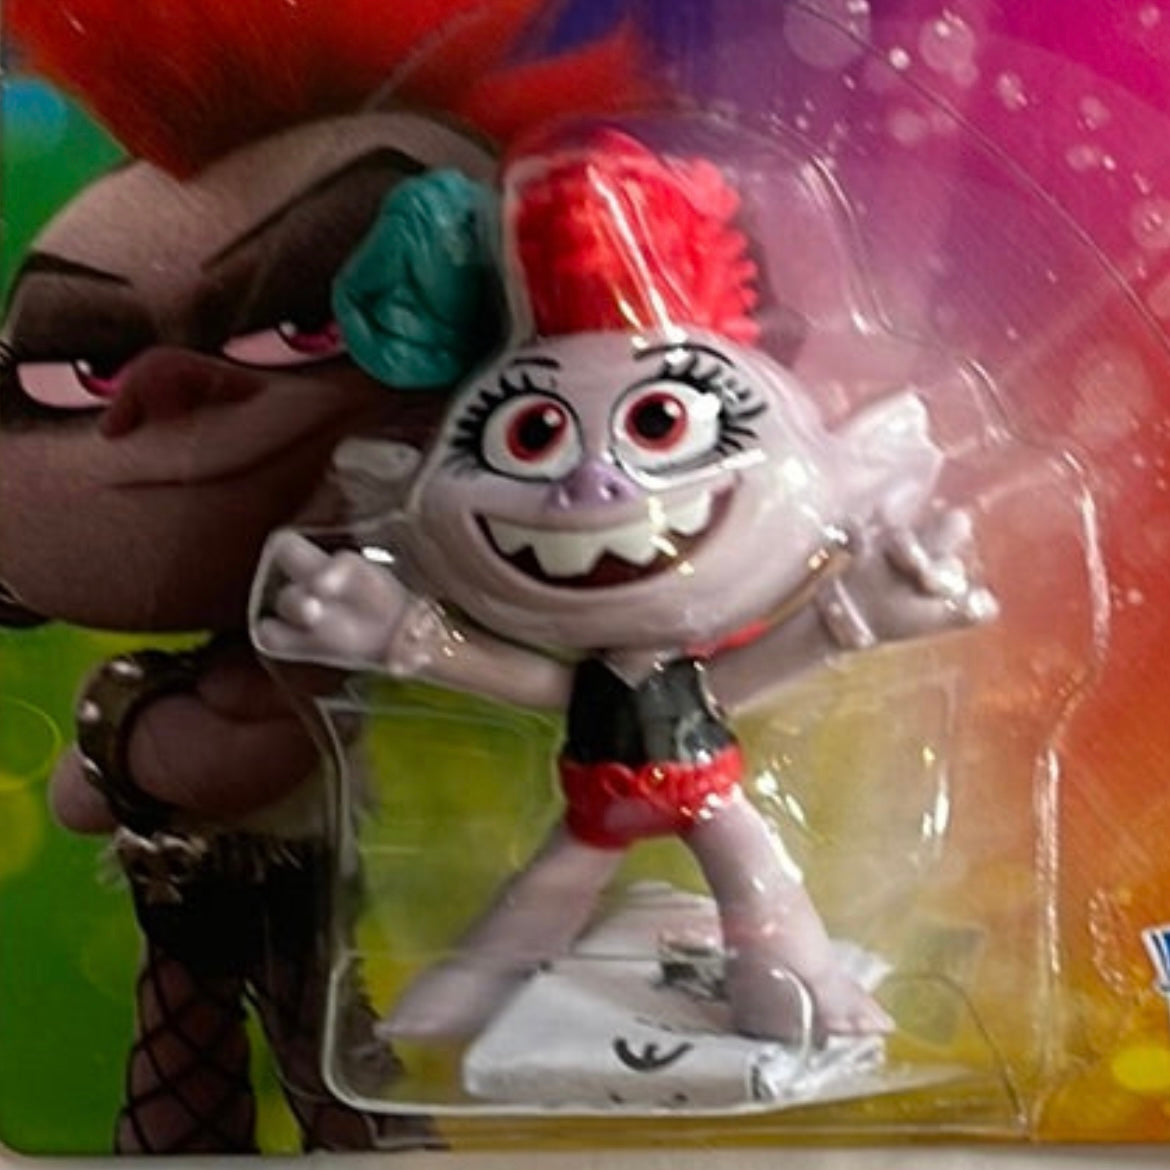 Toys and Games, Dreamworks Trolls World Tour Collectable Figure, Assorted